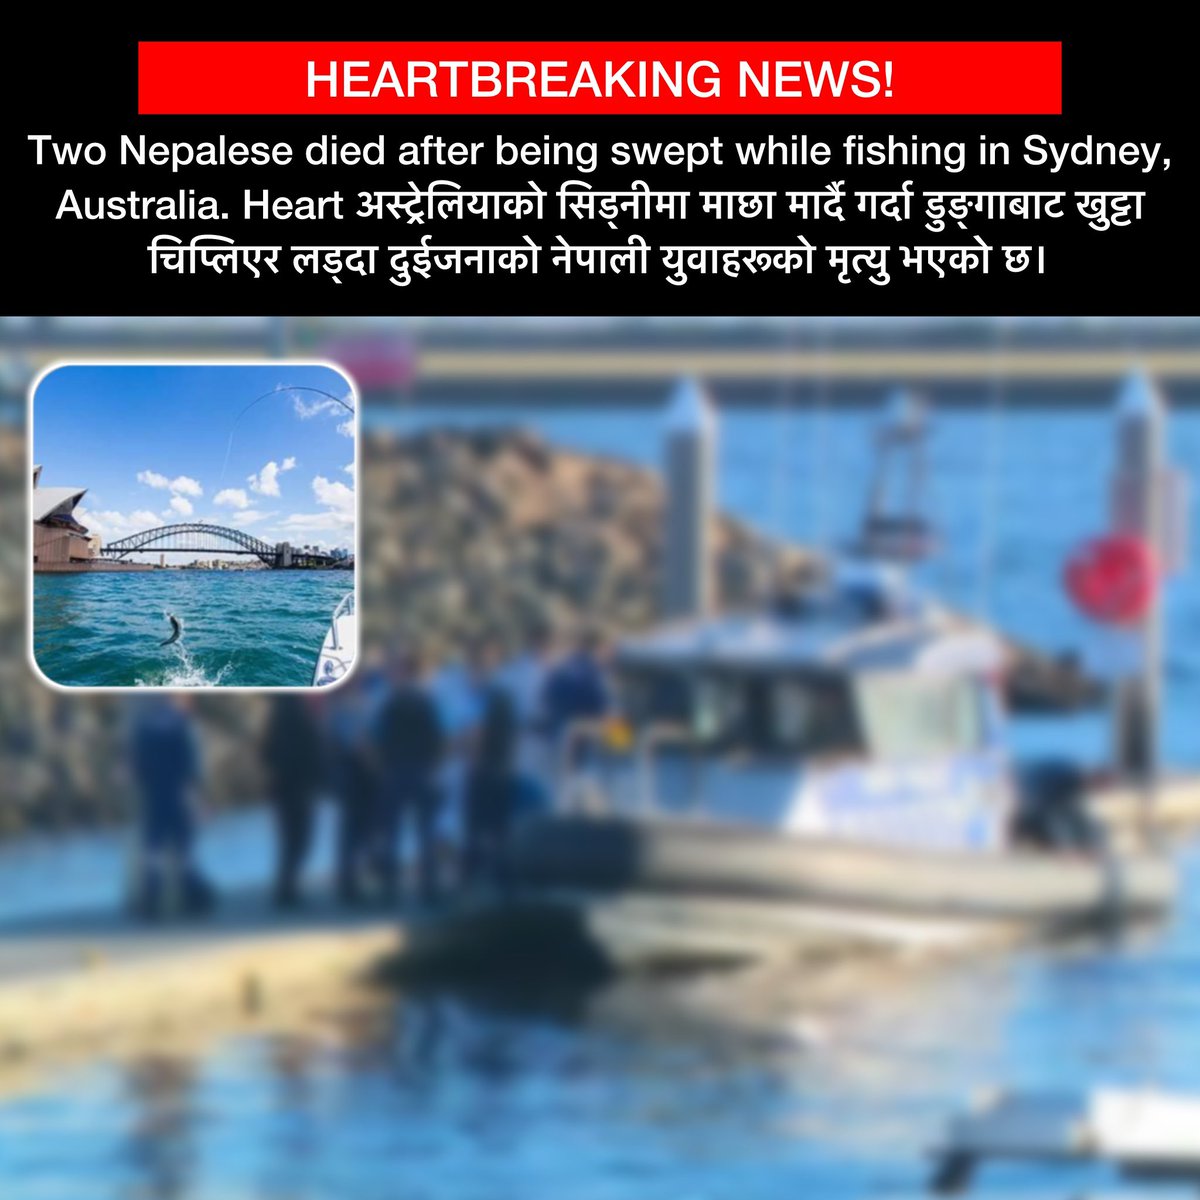 HEARTBREAKING NEWS 💔: Two Nepalese citizens have died after being swept away while fishing at a risky fishing spot in Sutherland Shire in Sydney, Australia. According to reports, the two men were rock fishing at the time of the accident and were not wearing life jackets. RIP